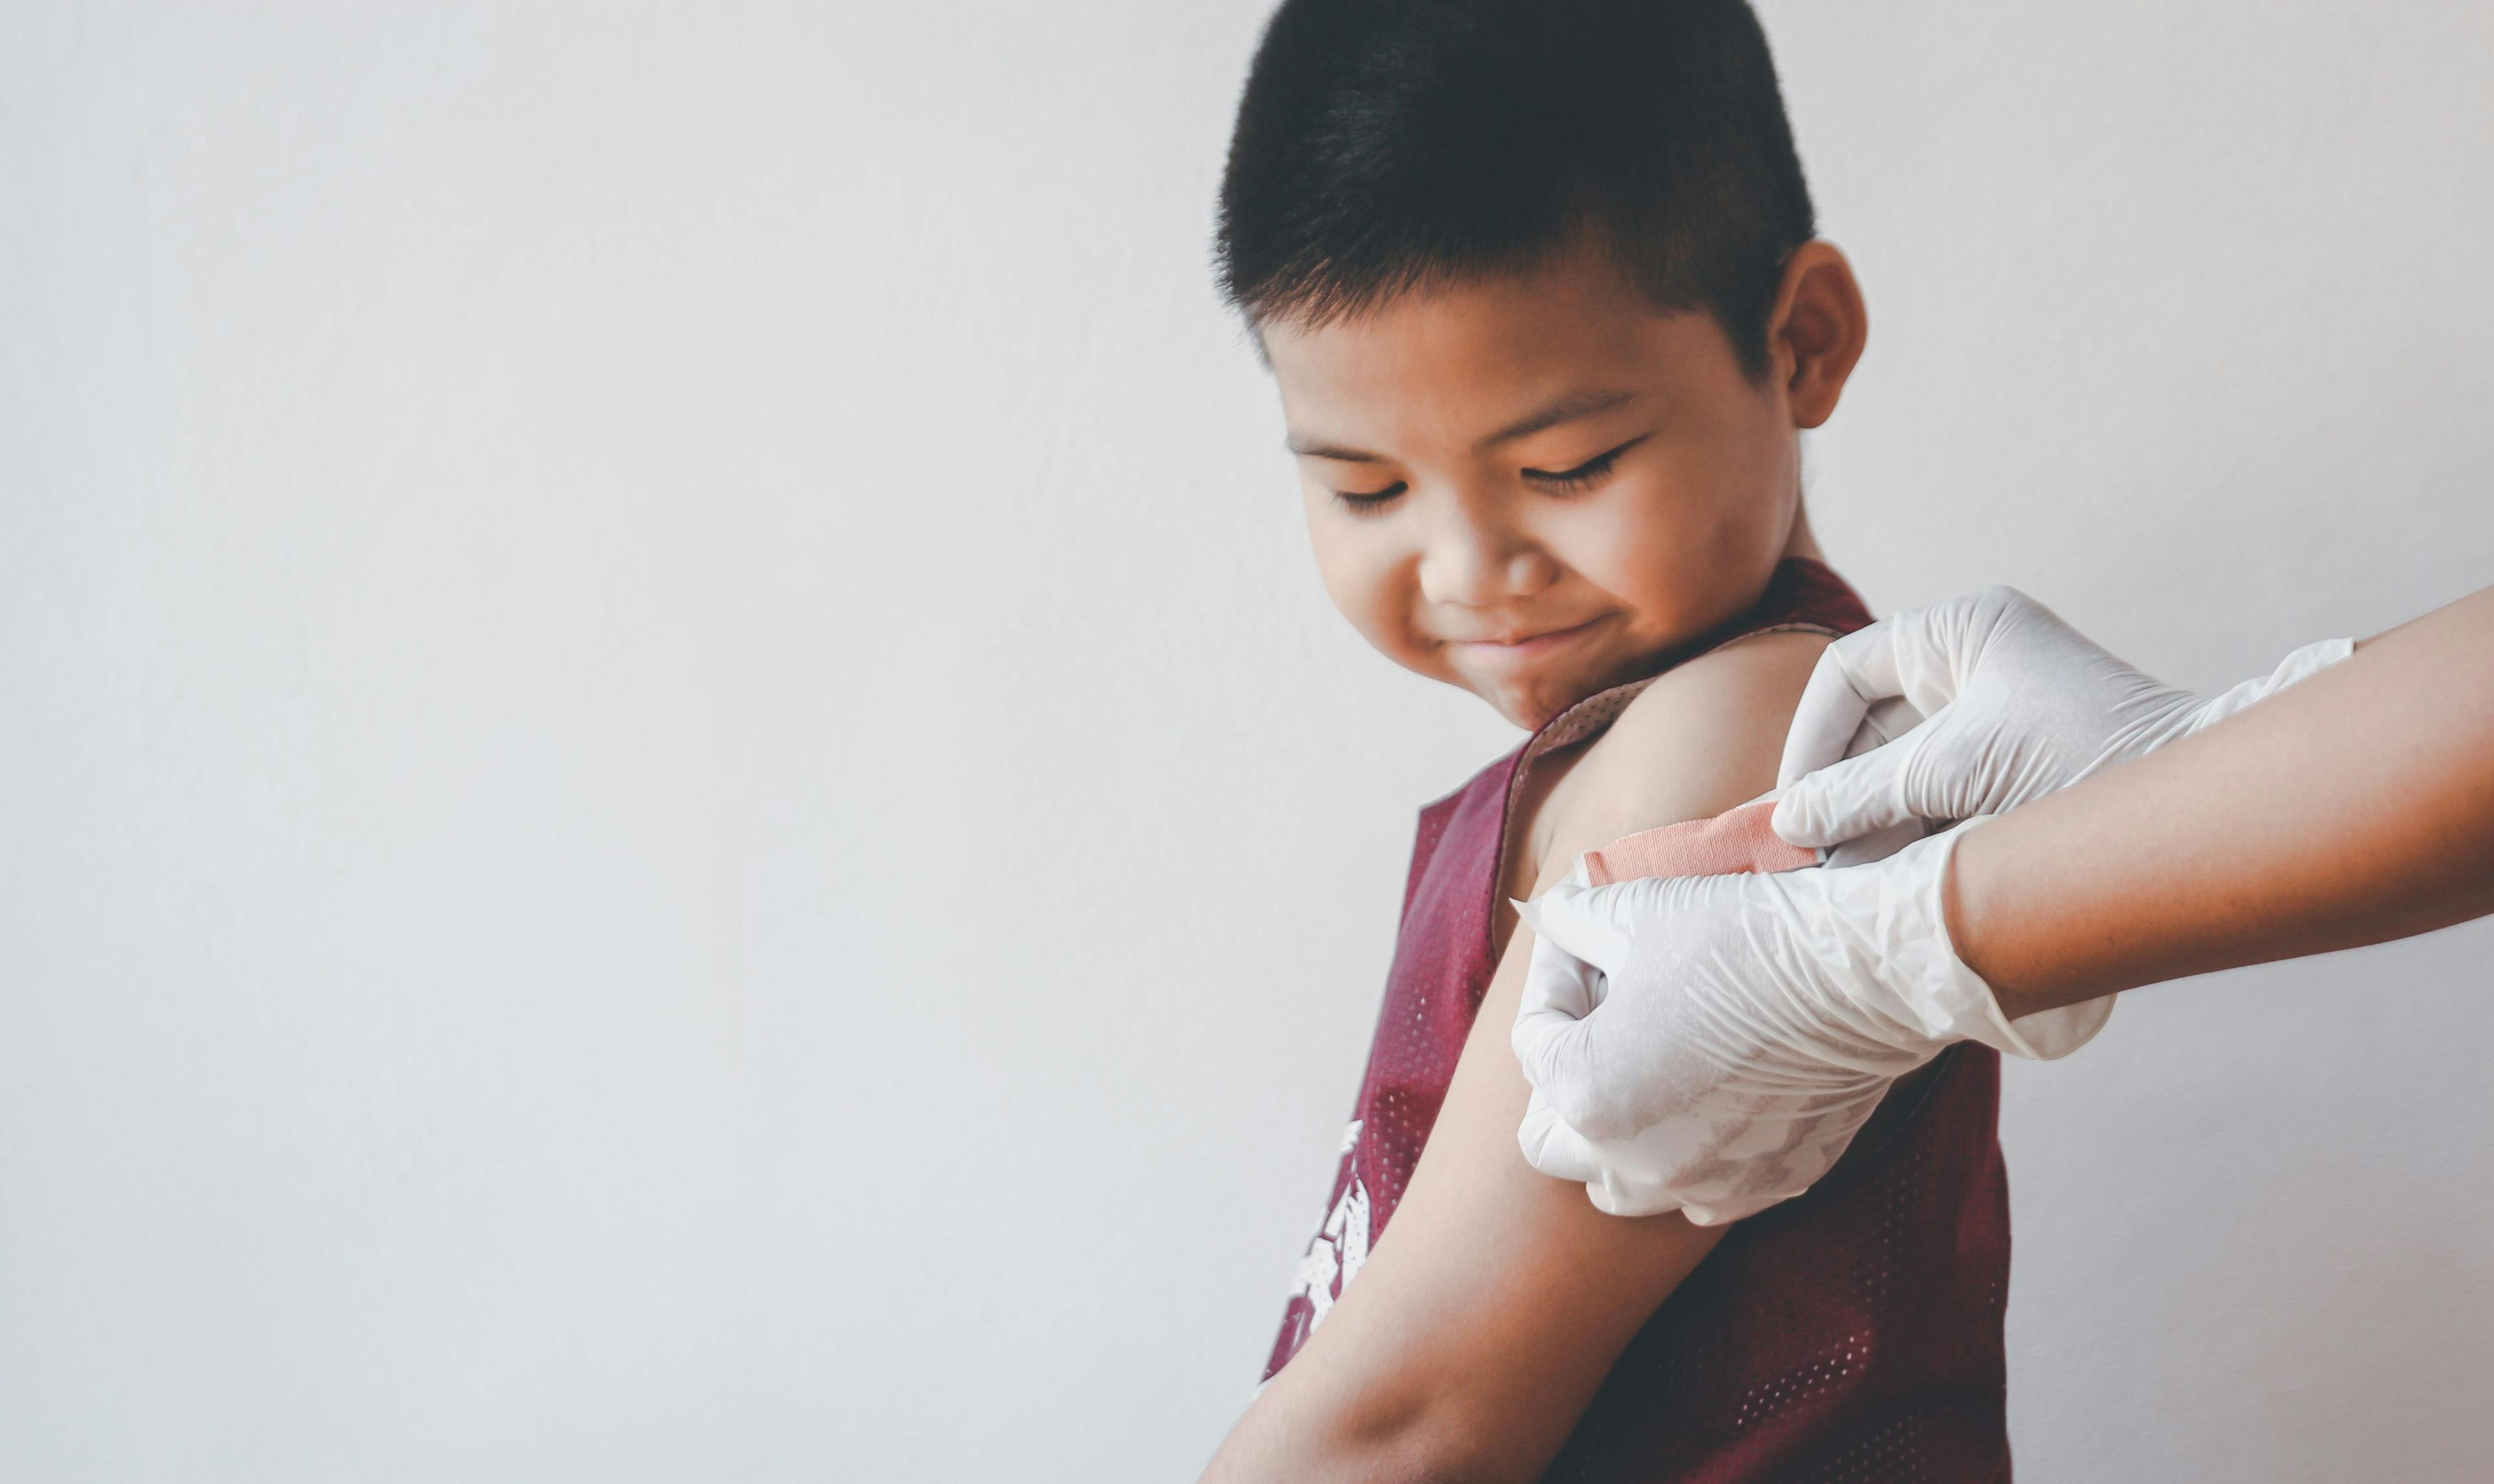 Parents express low confidence in pediatric COVID-19 vaccine 